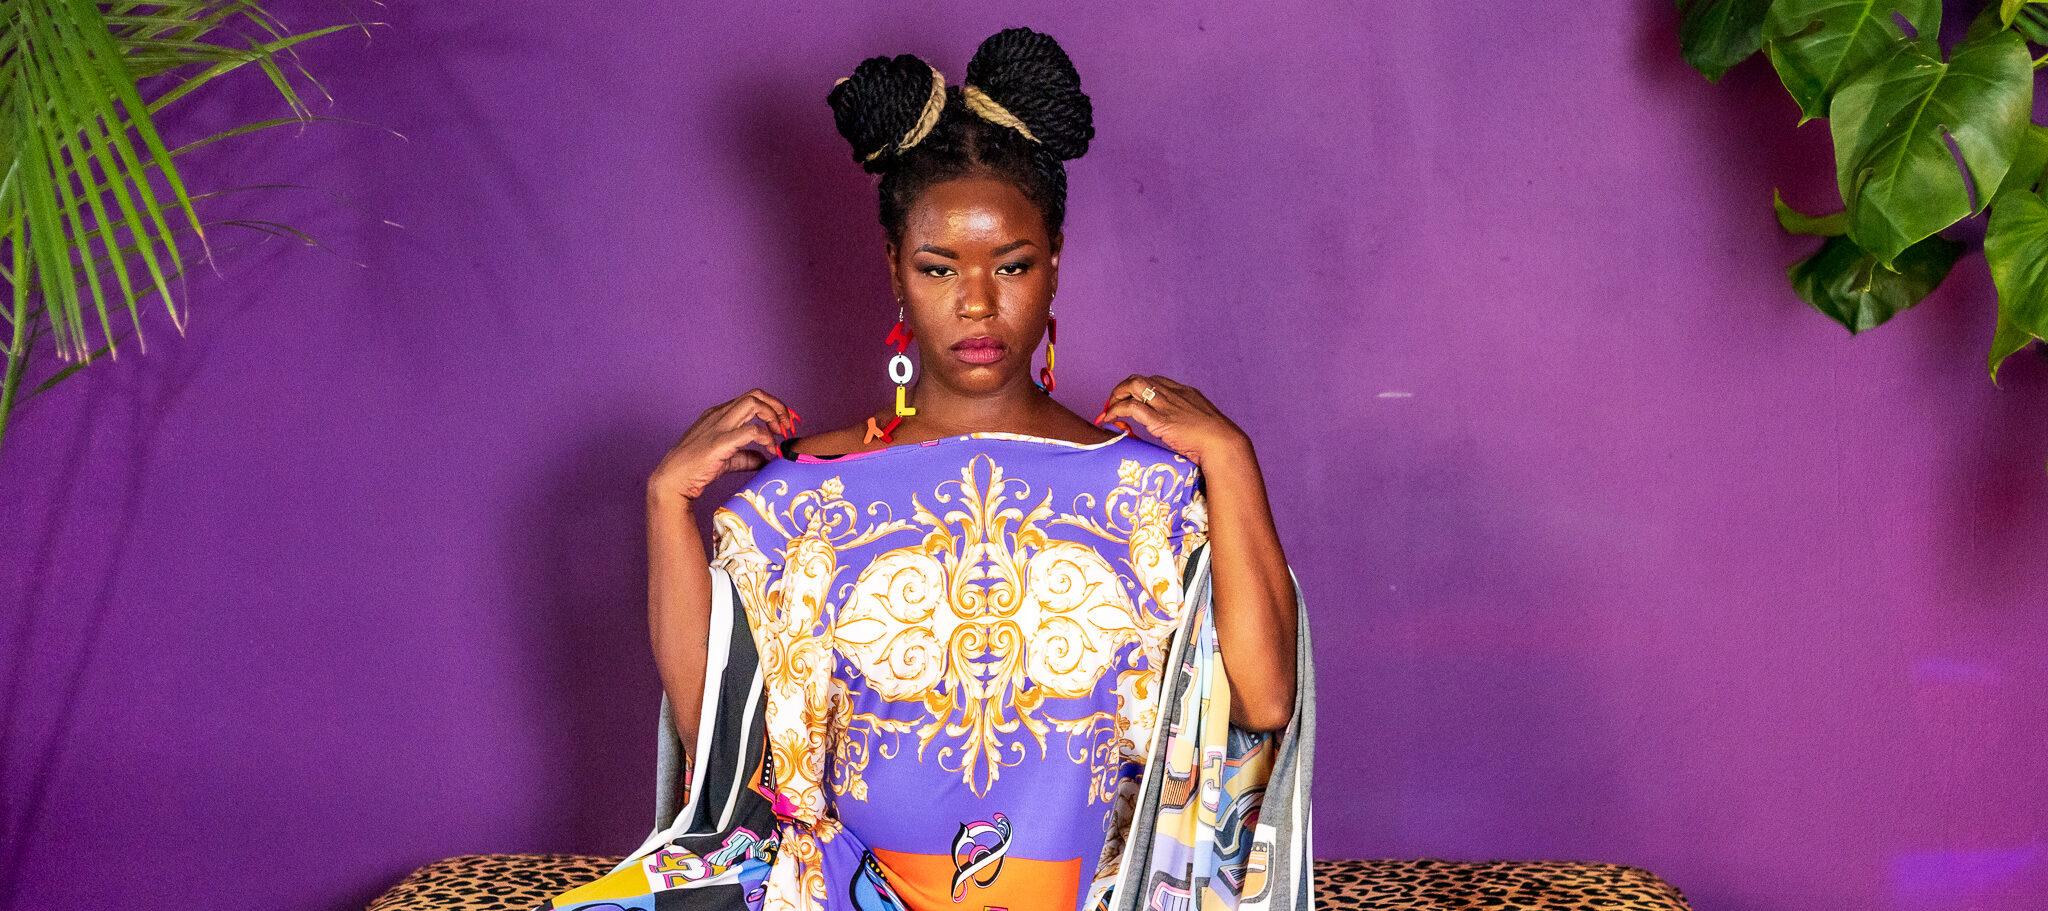 A medium-dark skinned person in a purple, white, and gold dress sits on an cheetah print bench in front of a purple wall. They stare directly in front of them with their hands on their shoulders.